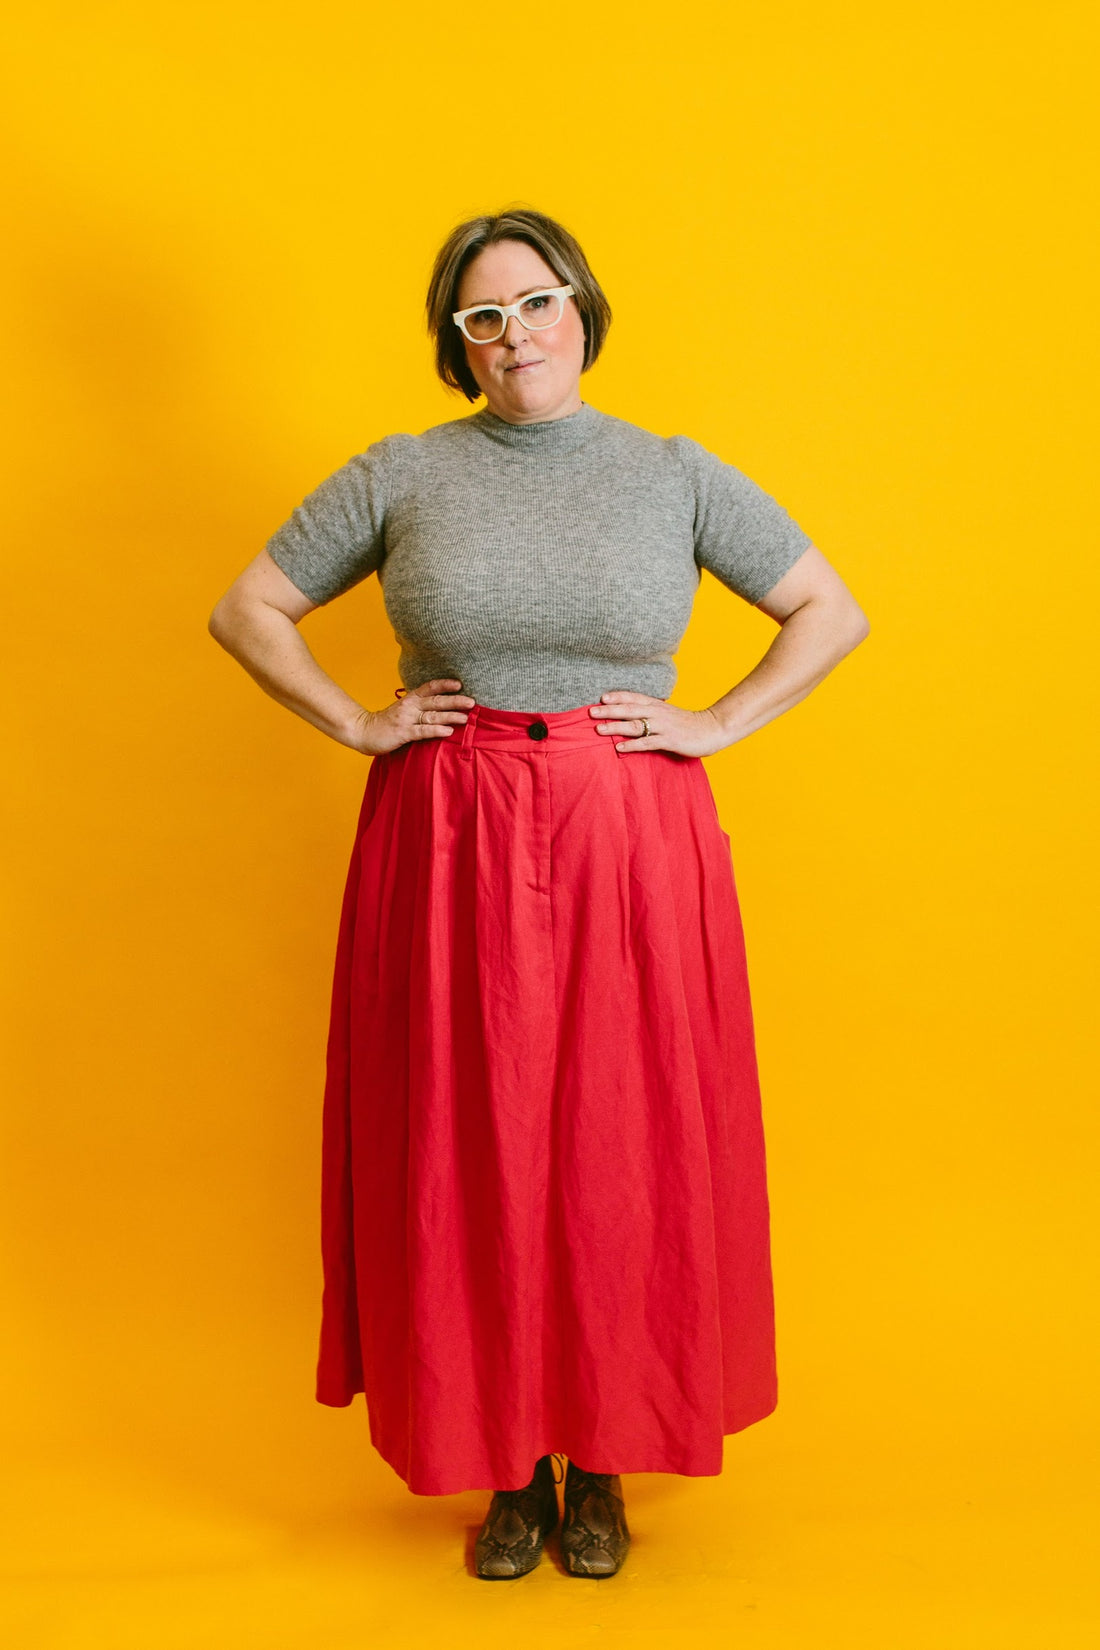 holly wears the mara hoffman tulay skirt with the 7115 by szeki mockneck tee and about arianne nico boots | a basic shop